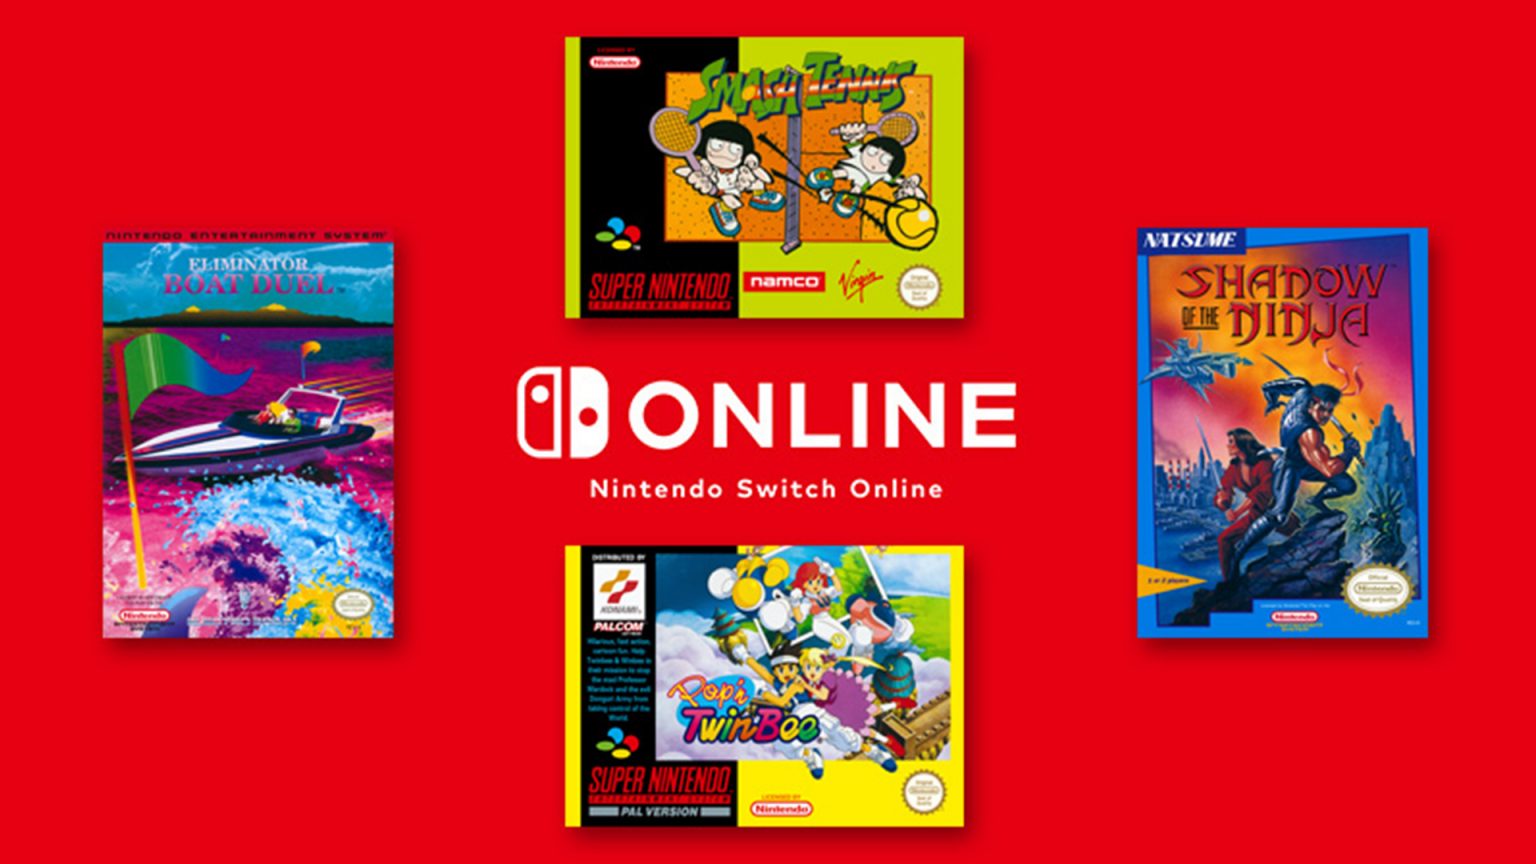 SNES and NES Nintendo Switch Online Games for February Revealed • The